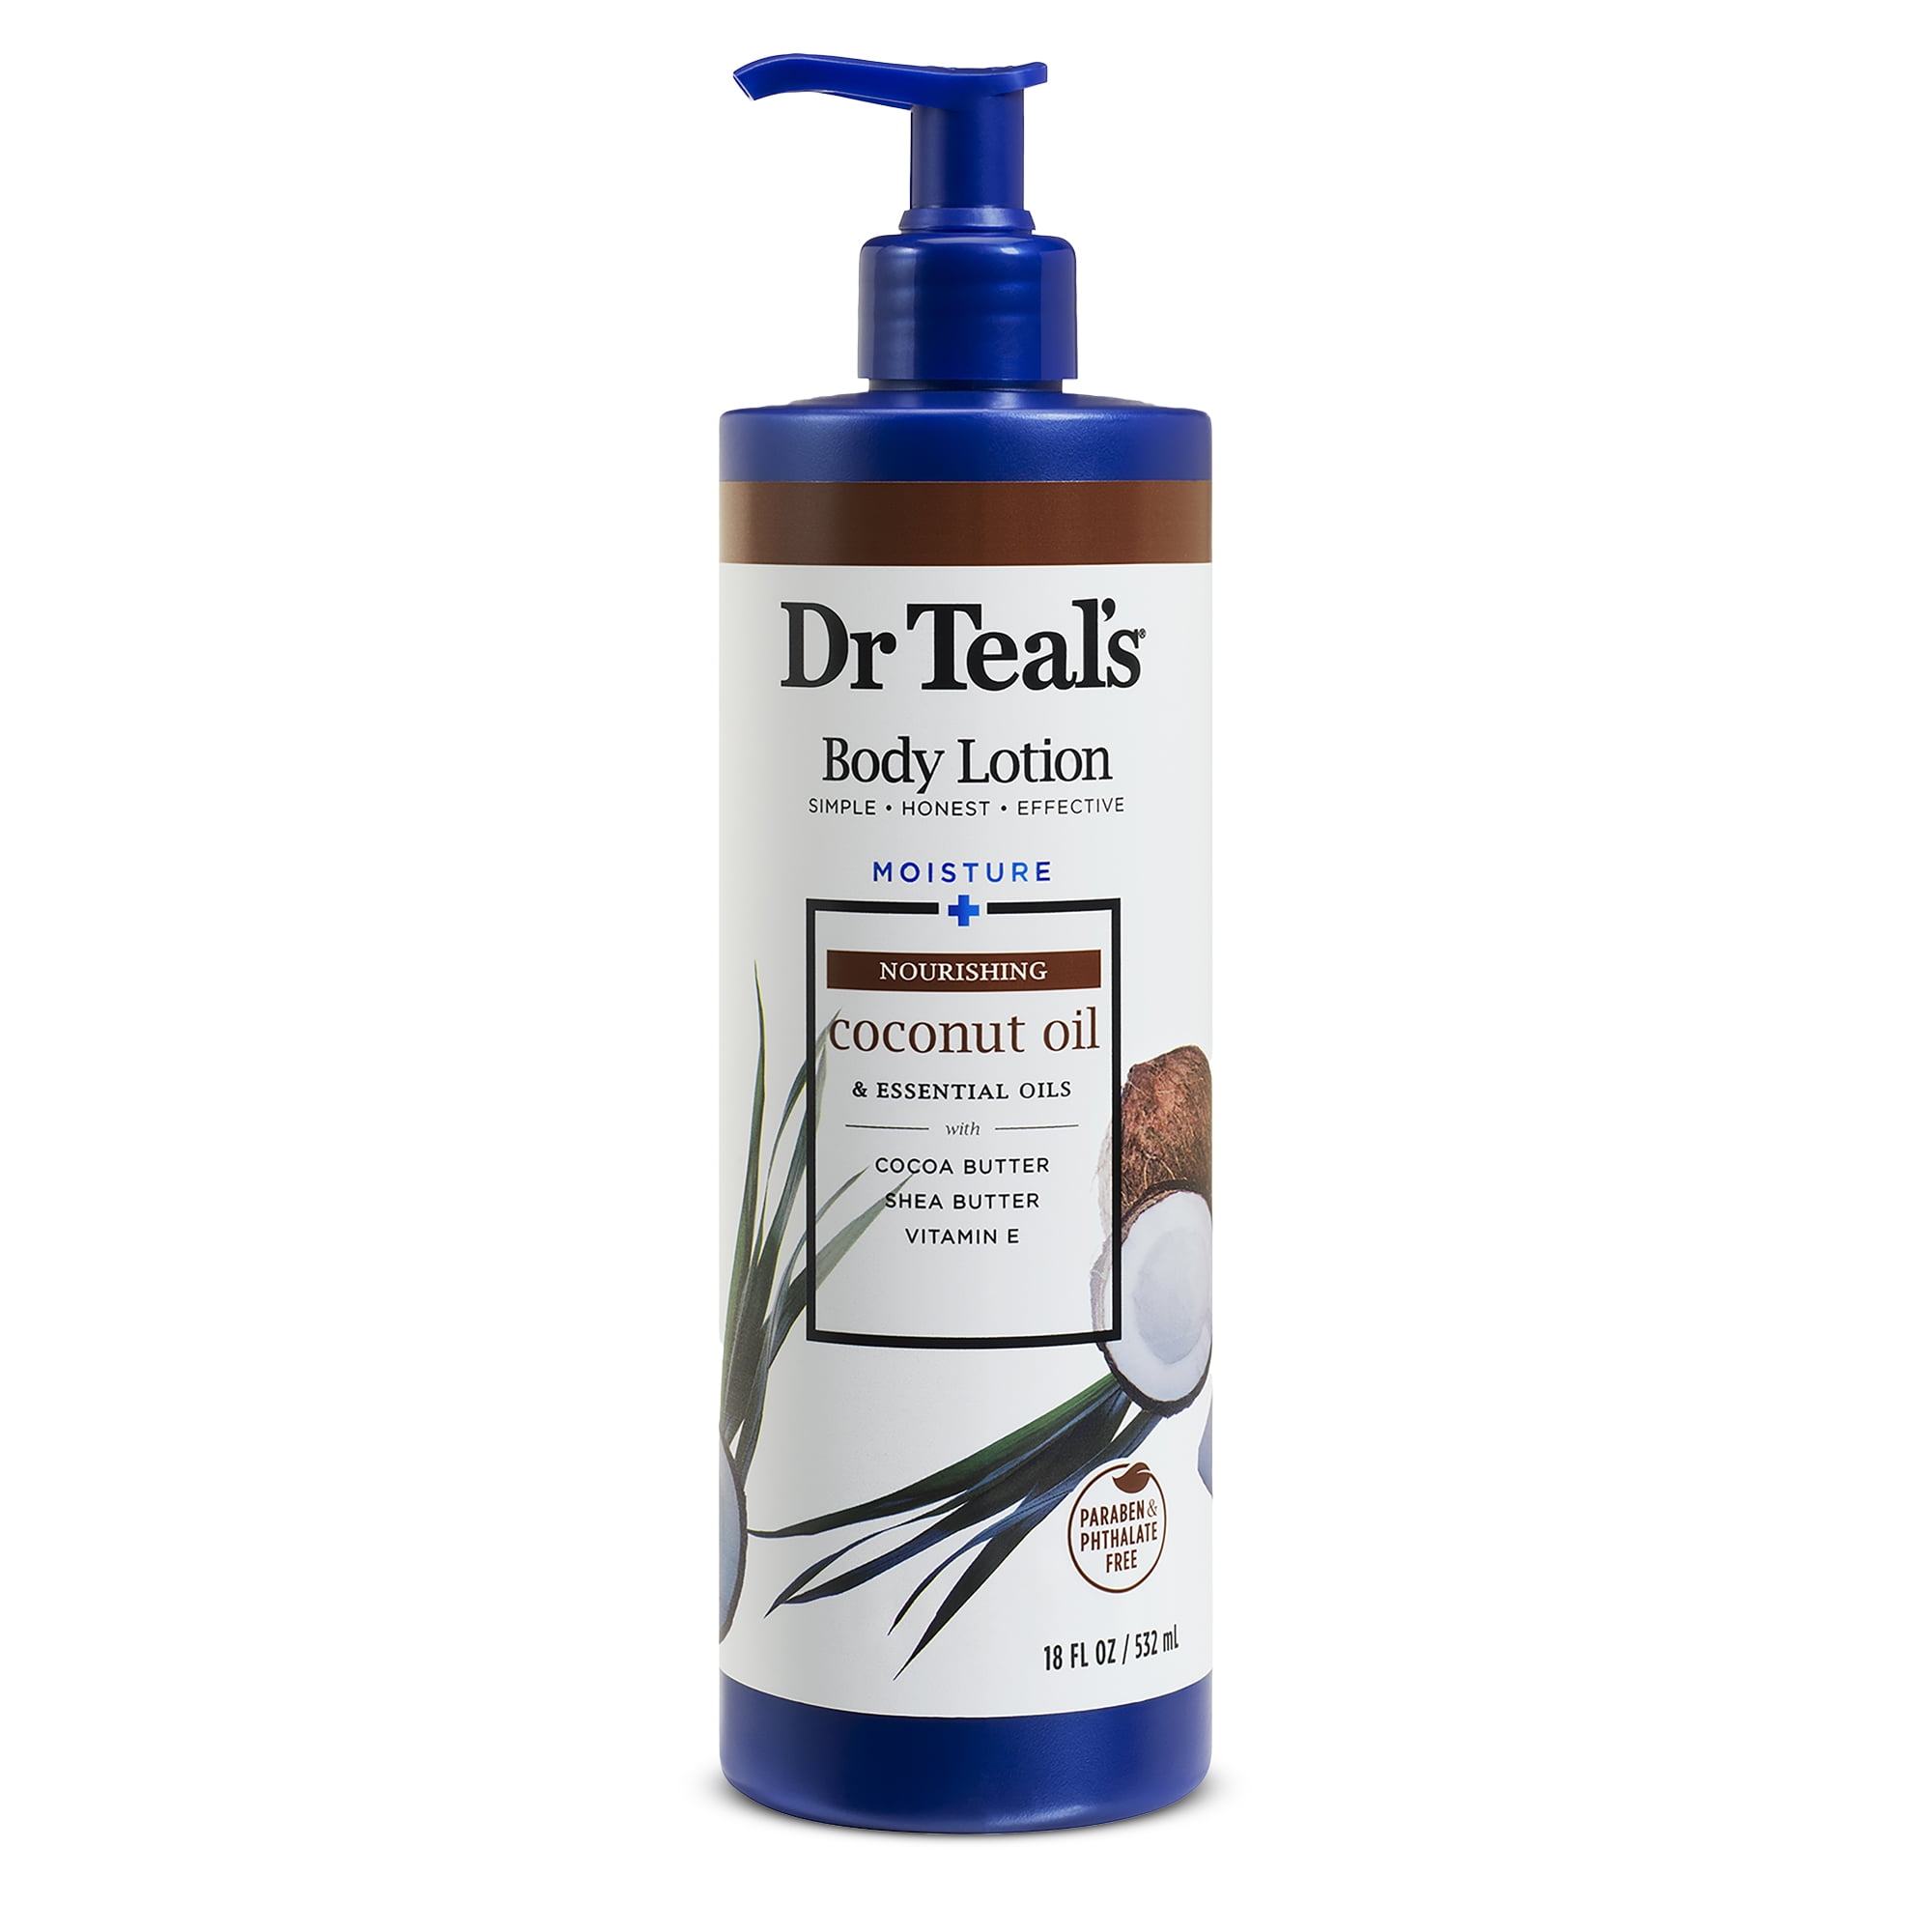 Dr Teal's Body Lotion, Moisture + Nourishing with Coconut Oil & Essential Oils, 18 fl oz.